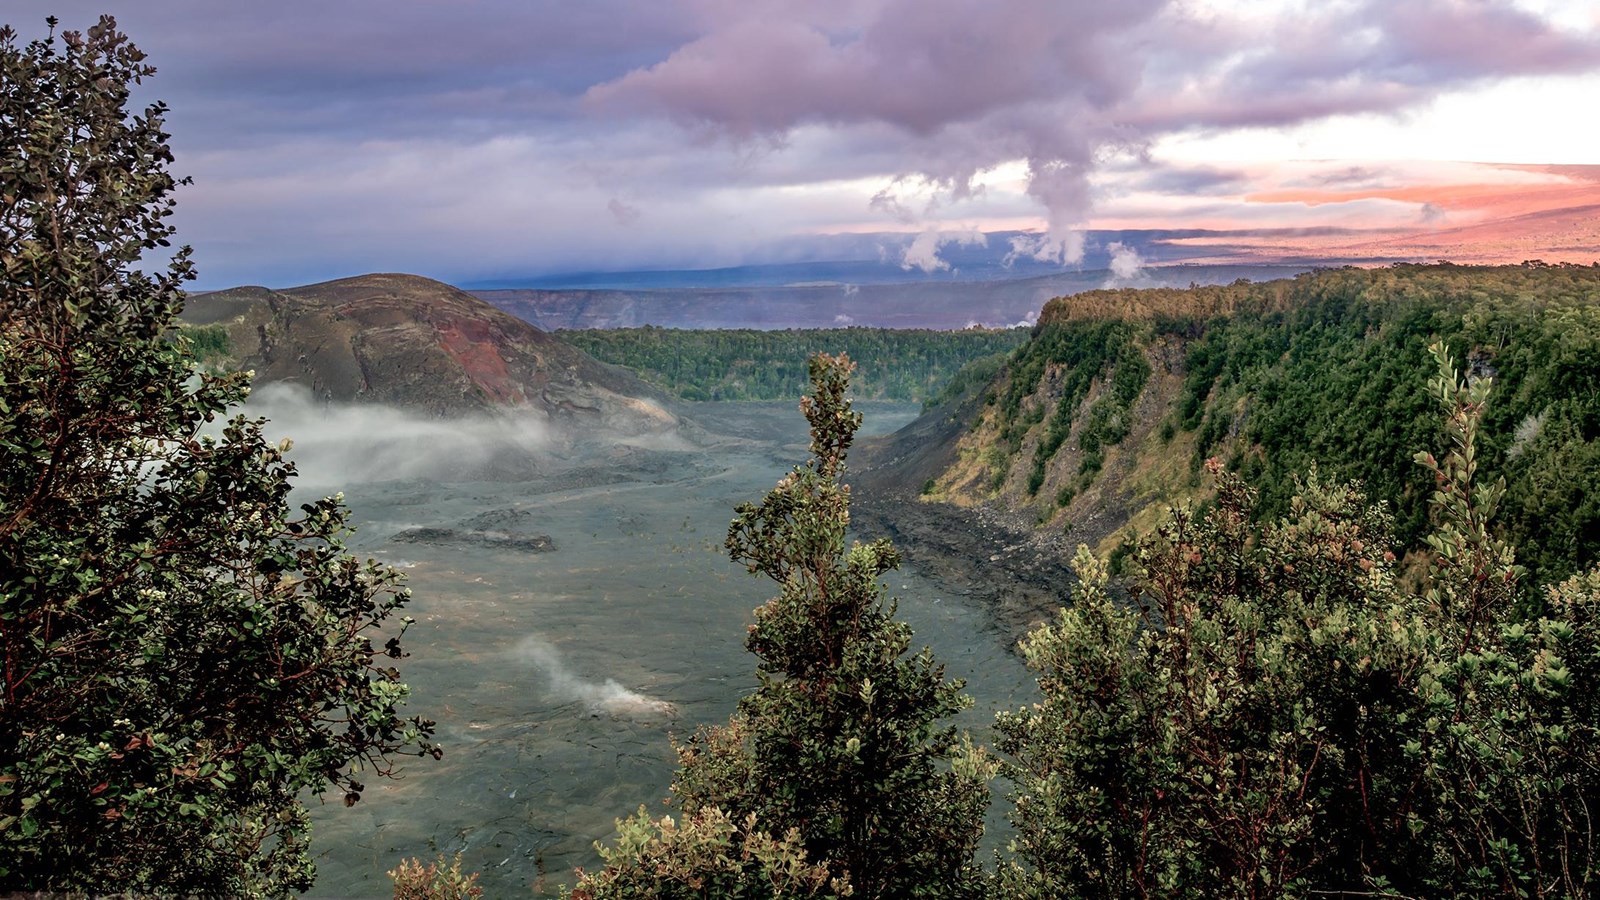 A  volcanic crater at sunrise with trees in the foreground